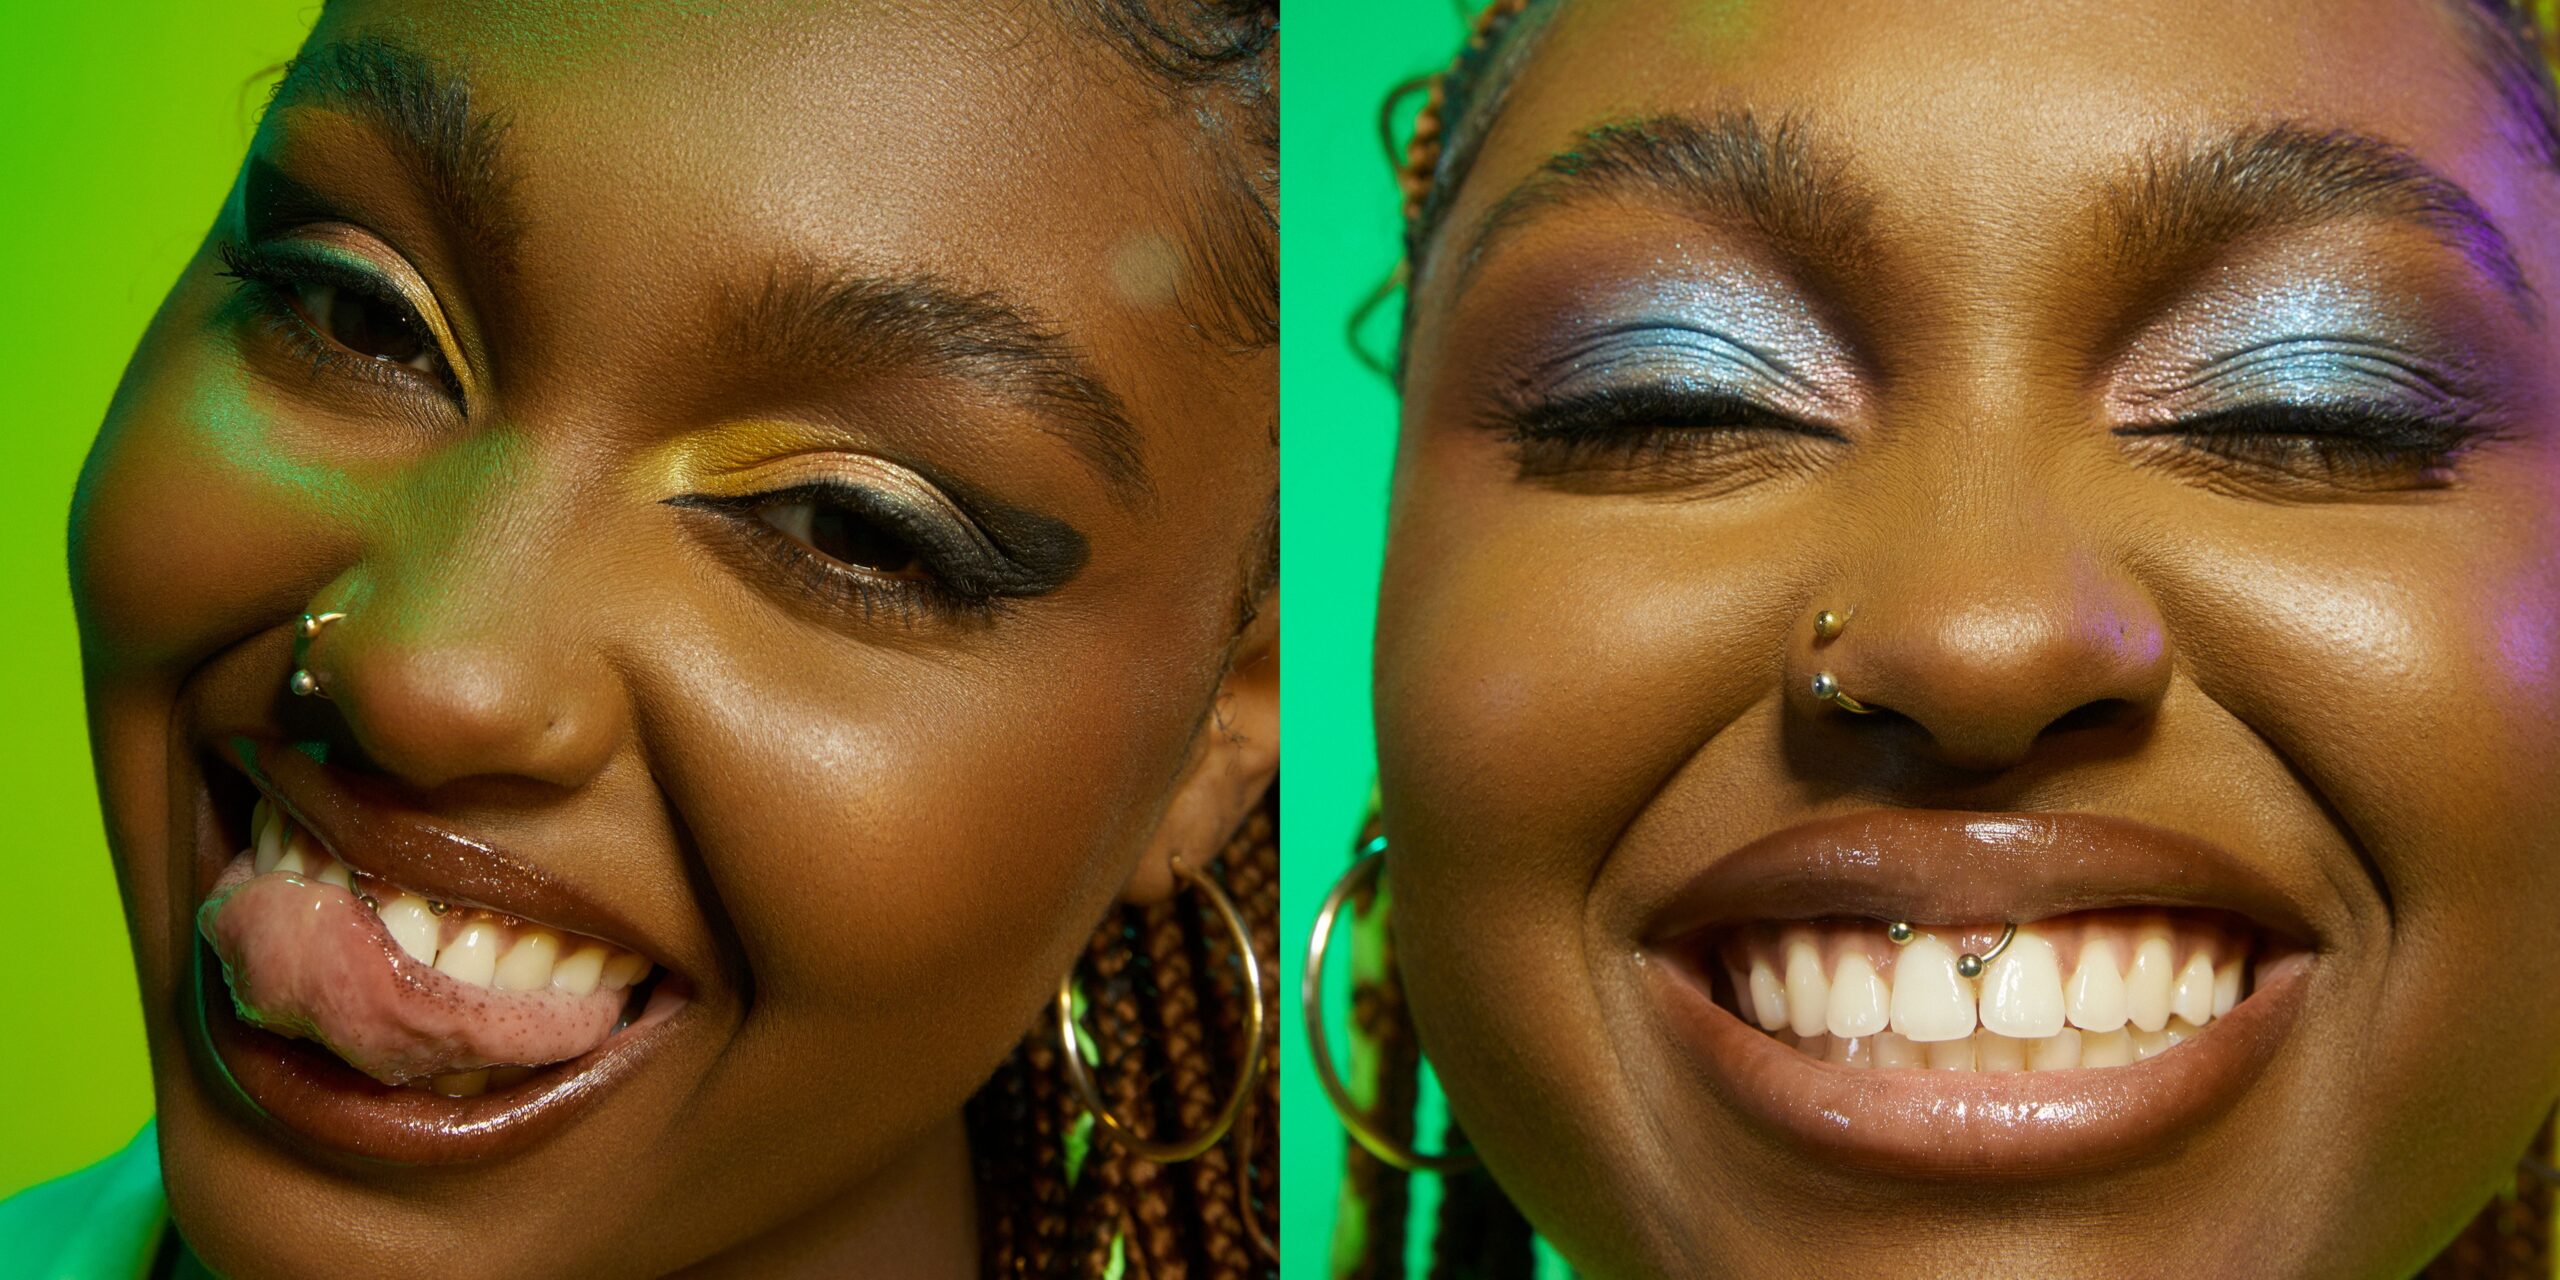 Tiana Major9 Co-created An e.l.f. Cosmetics Electric Mood Collection—And She Gave Us All The Details!